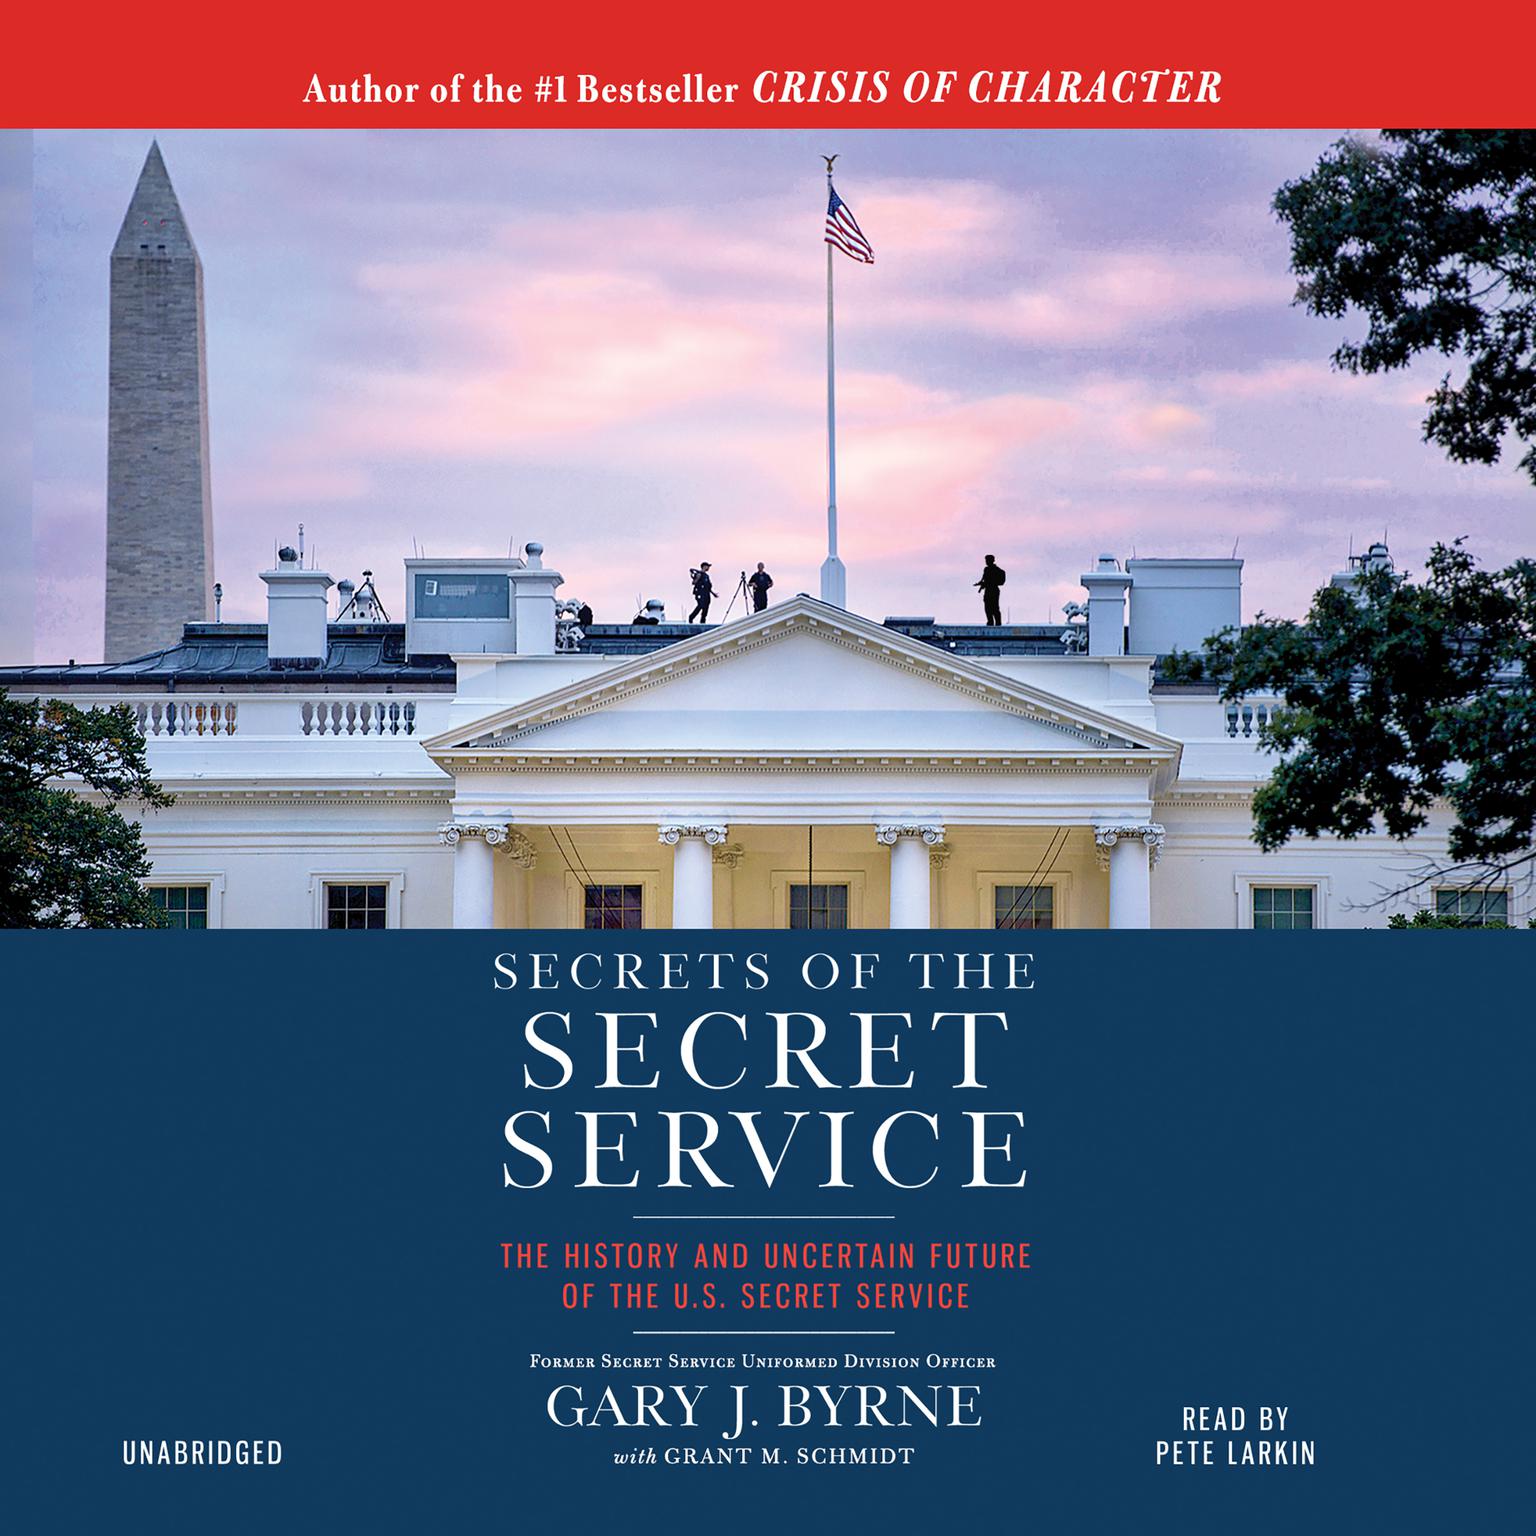 Secrets of the Secret Service: The History and Uncertain Future of the U.S. Secret Service Audiobook, by Gary J. Byrne